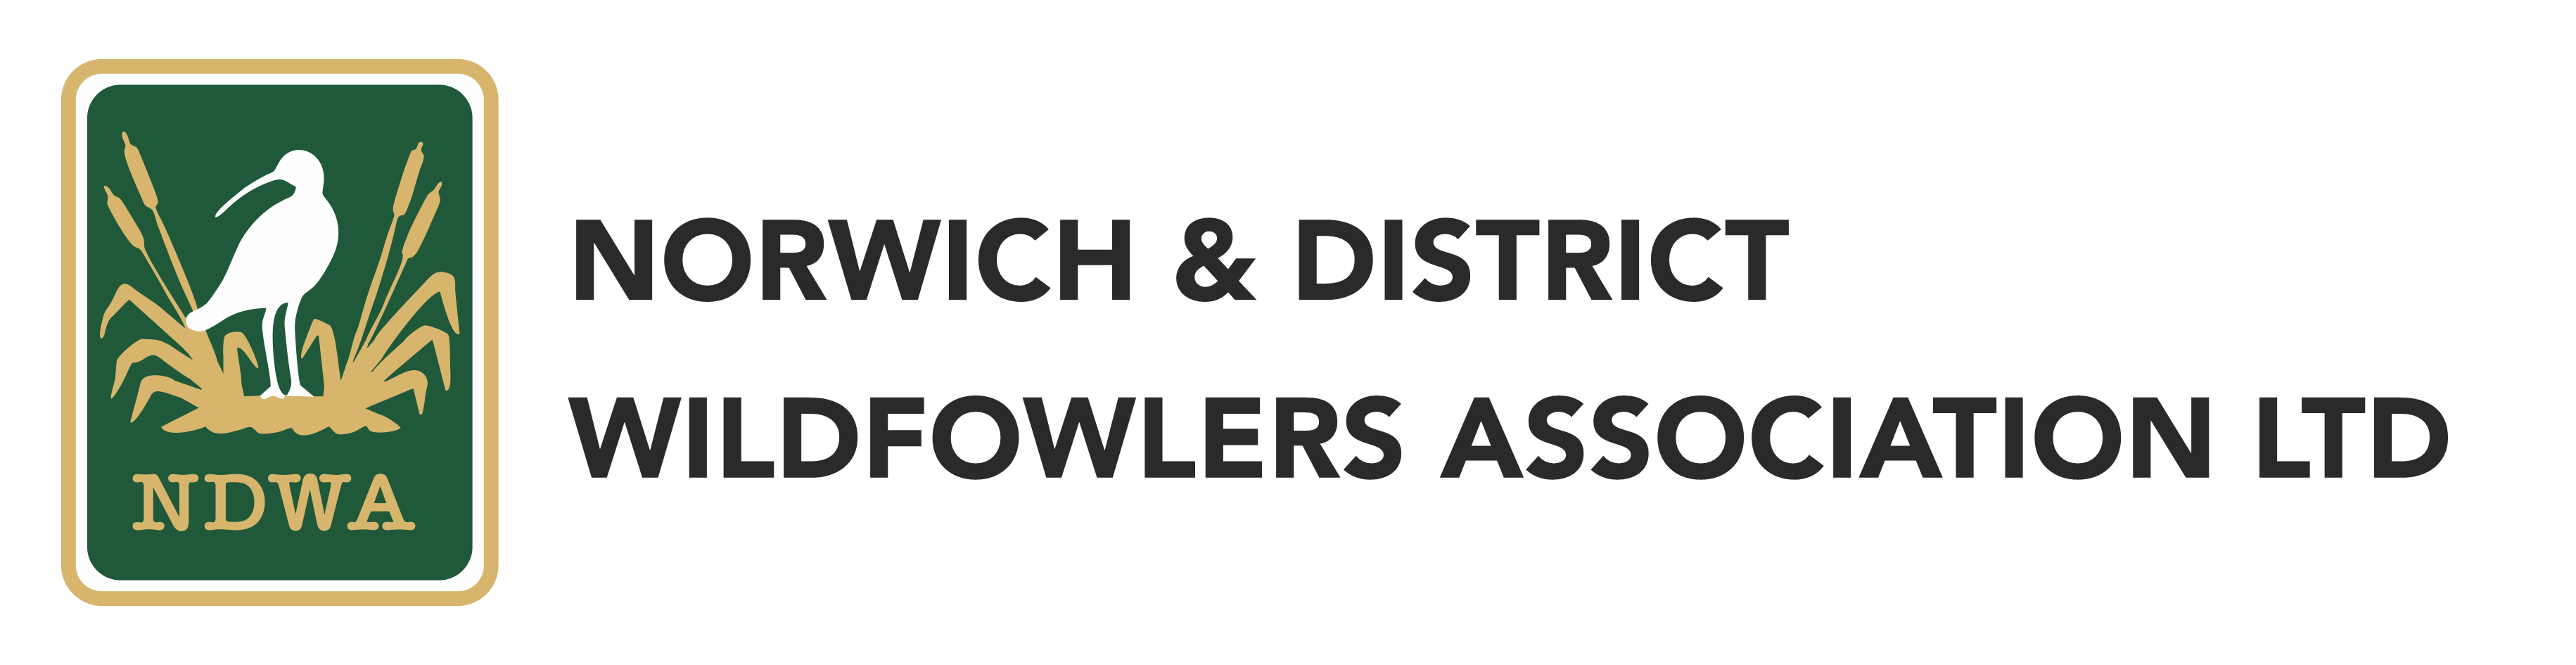 Norwich And District Wildfowlers Association Ltd 